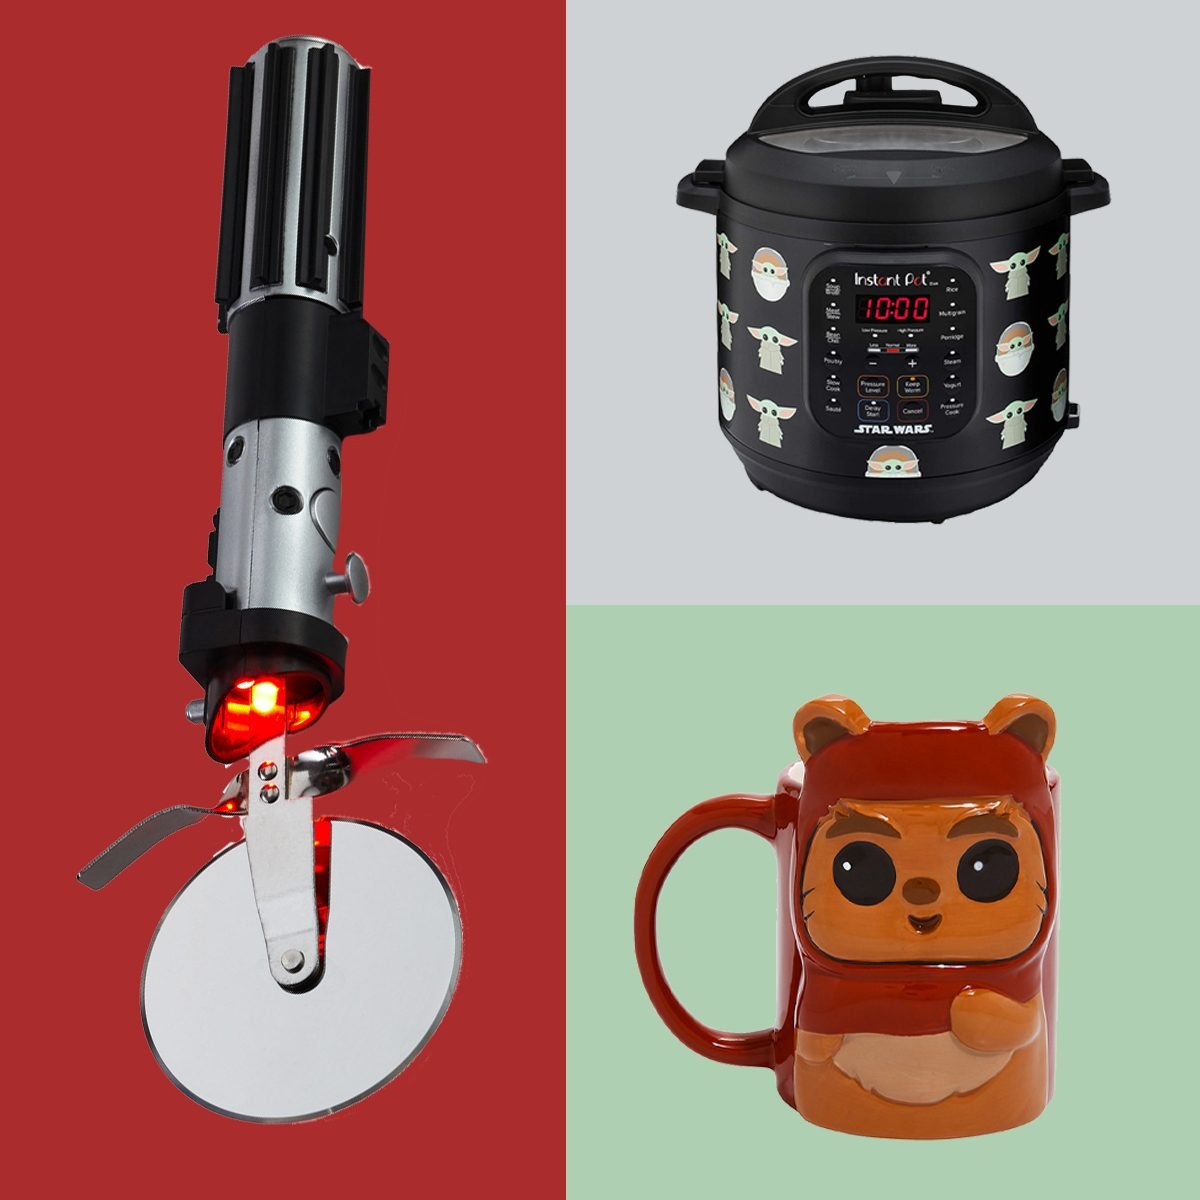 The Best Star Wars Gifts in the Galaxy: 37 Items to Buy in 2022